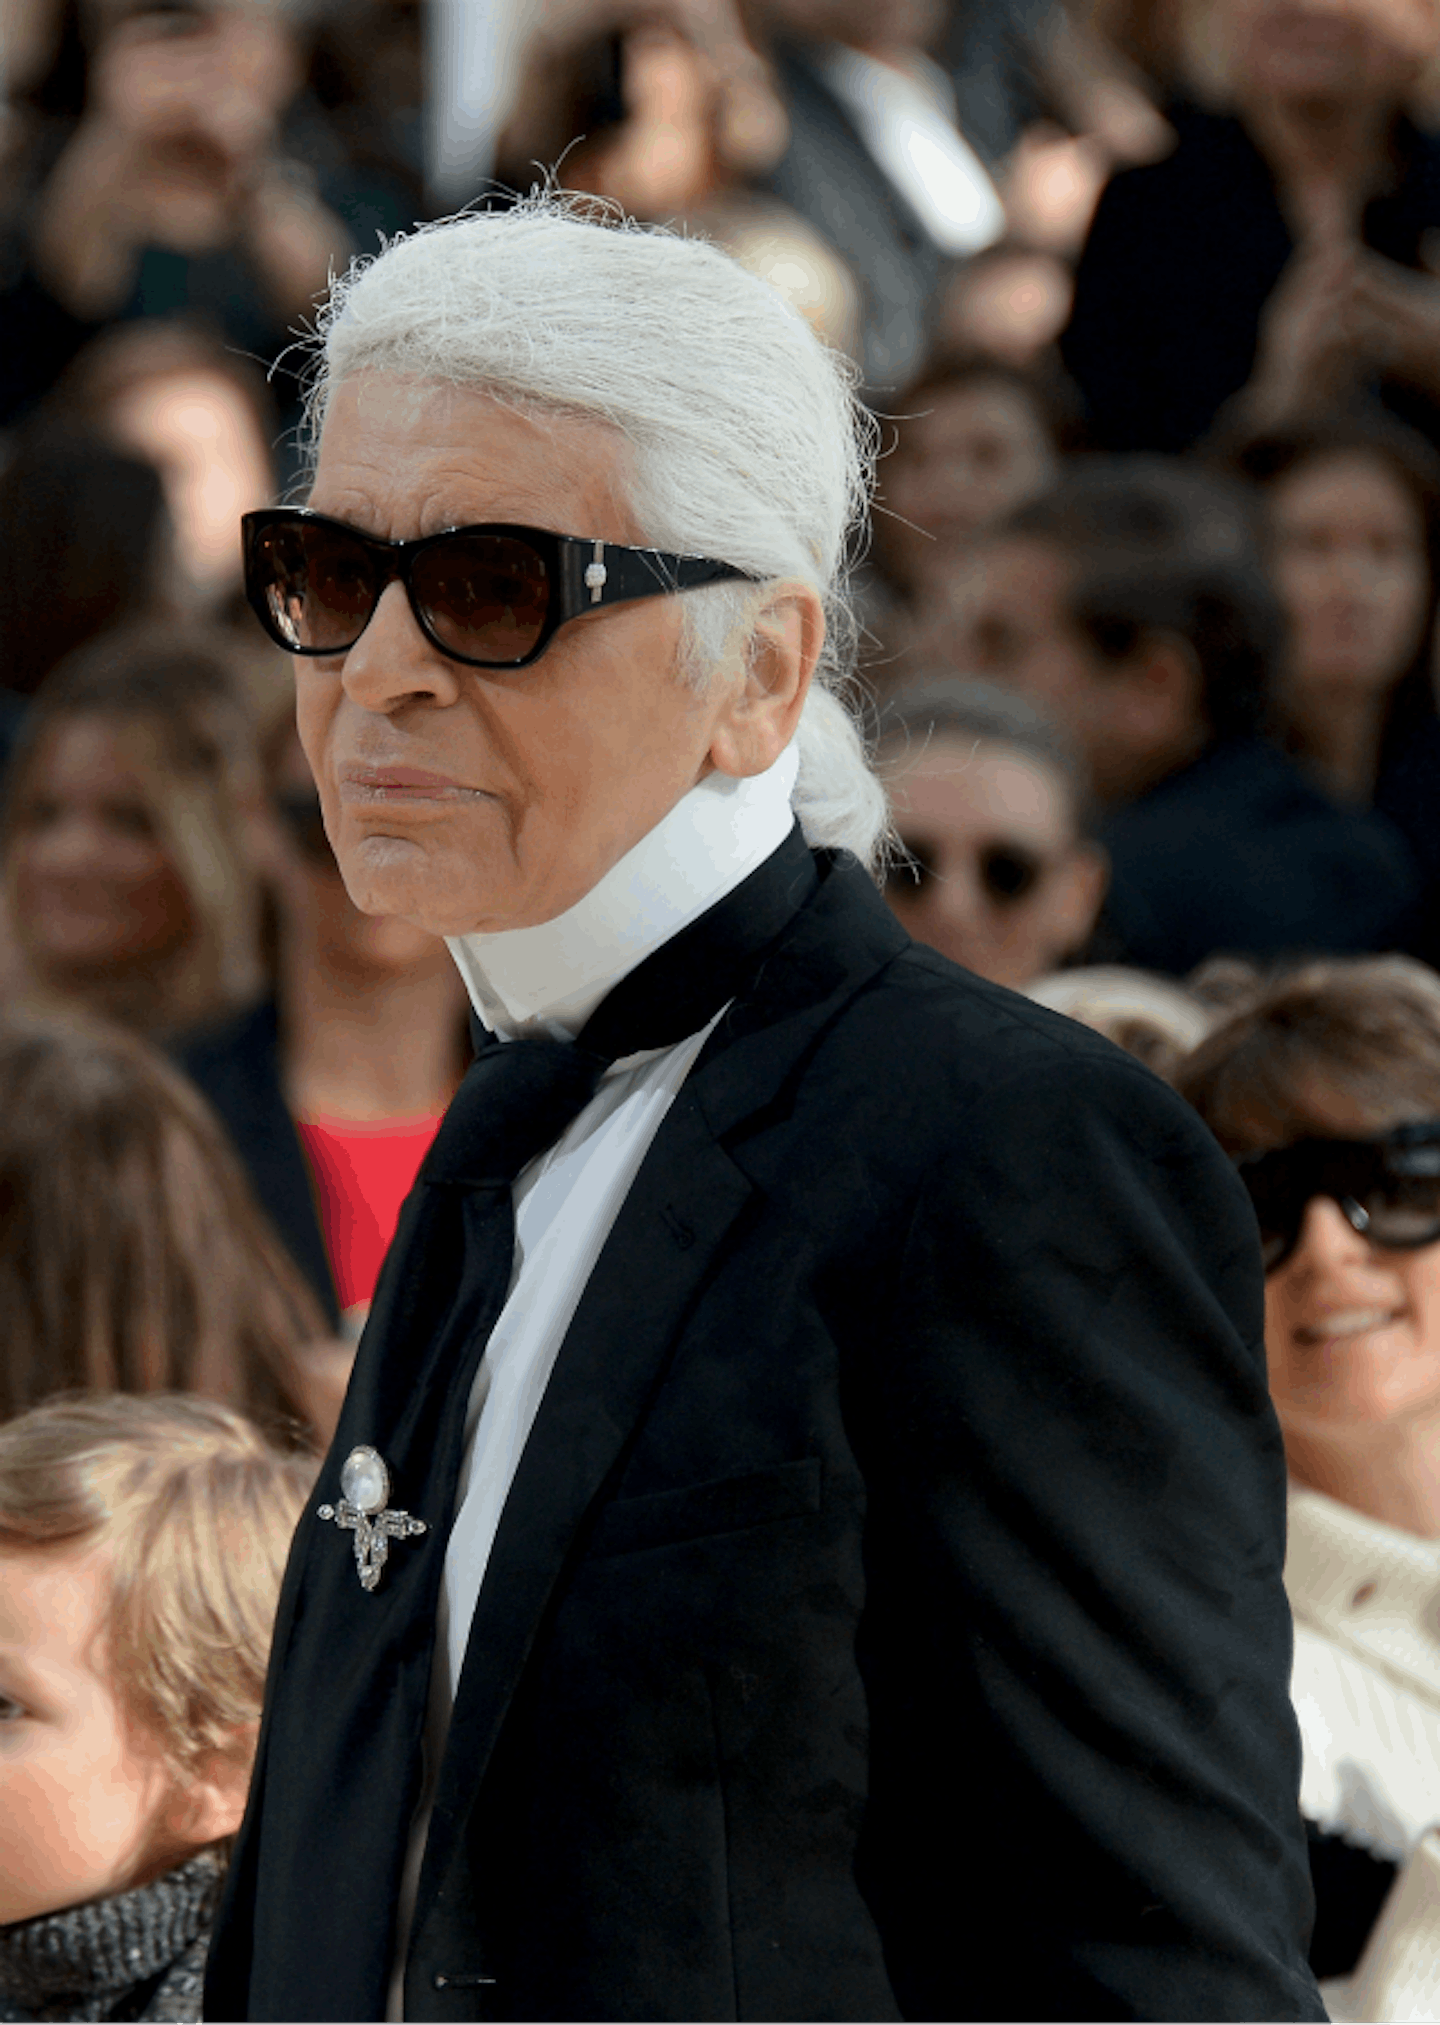 Karl Lagerfeld Quotes: The Most Famous Quotes From The Chanel Designer